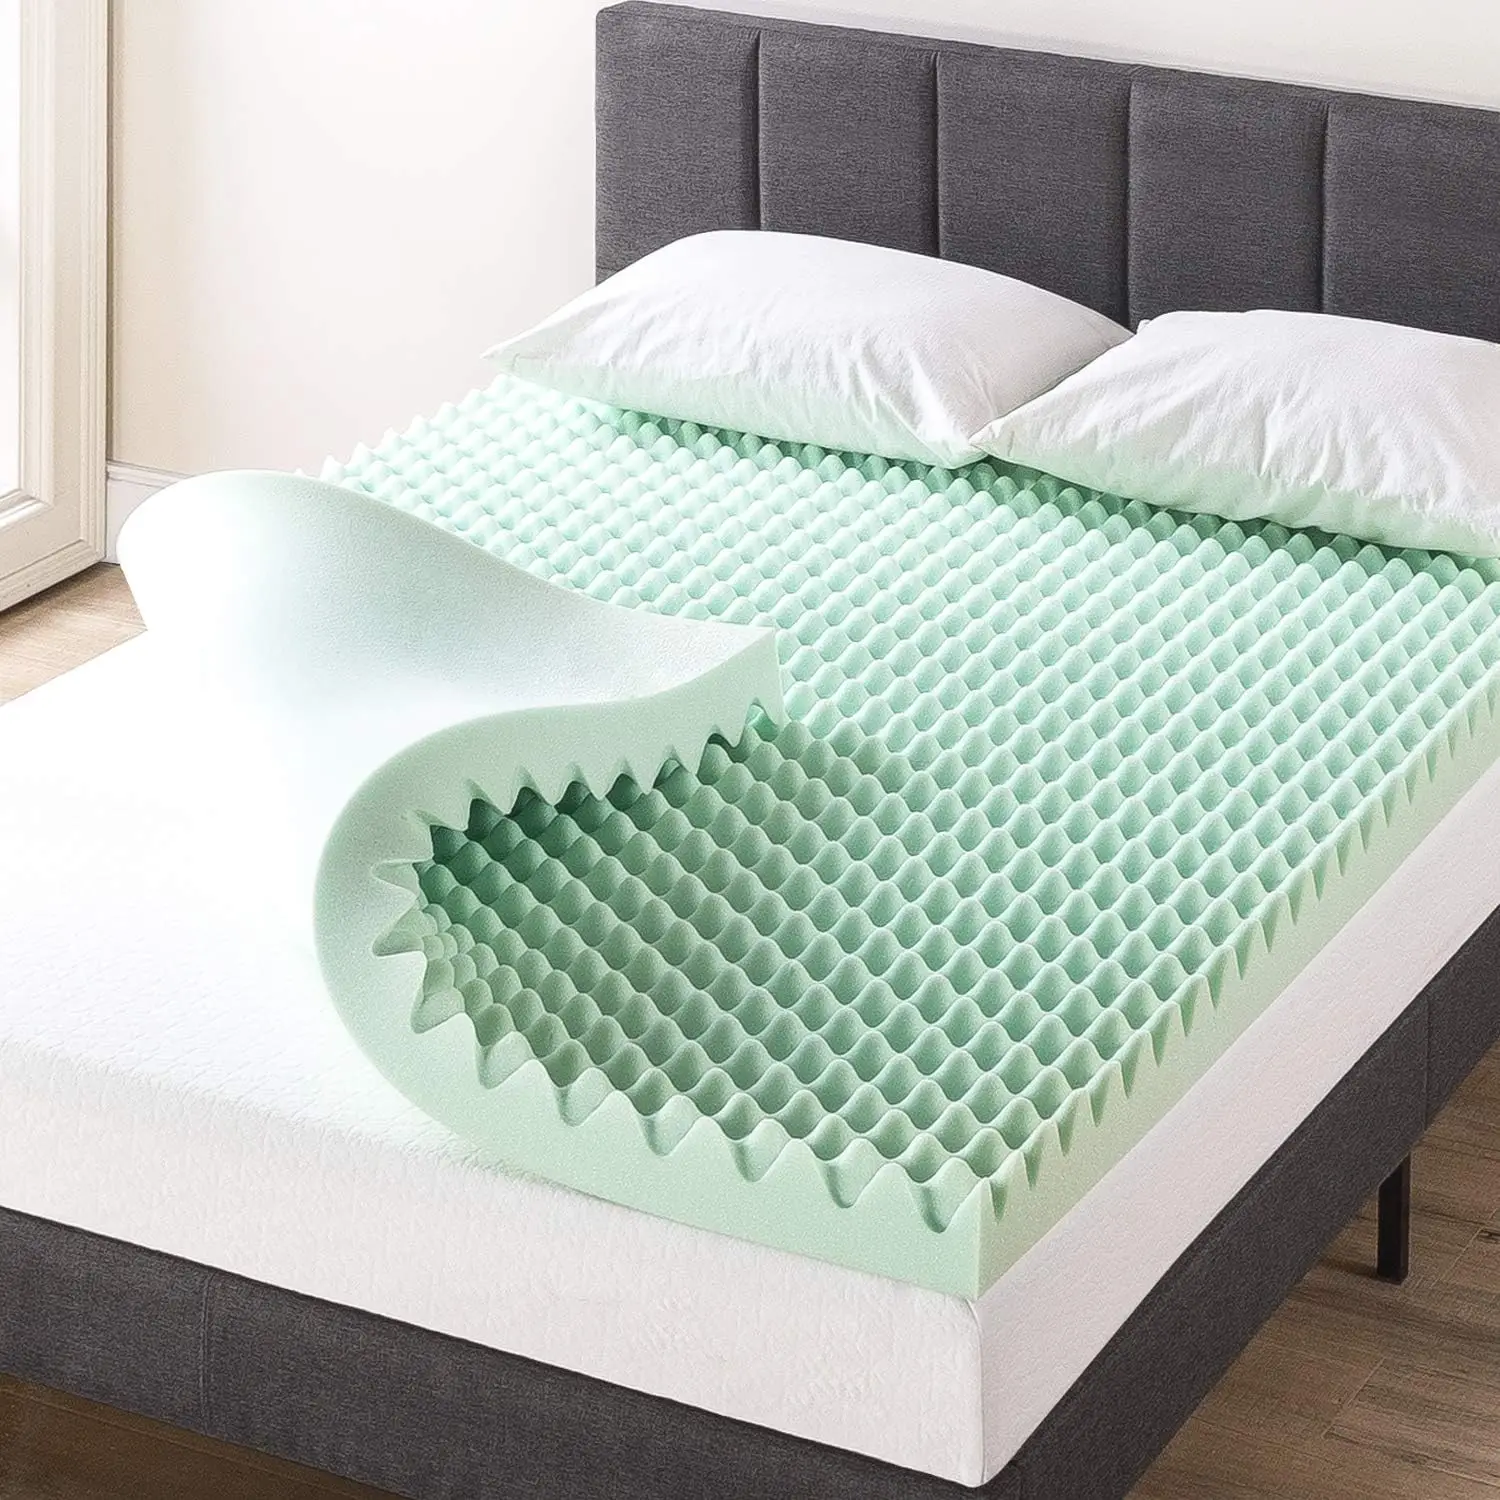 

Best Price Mattress 4 Inch Egg Crate Memory Foam Mattress Topper with Calming Aloe Infusion, CertiPUR-US Certified, Queen,Green